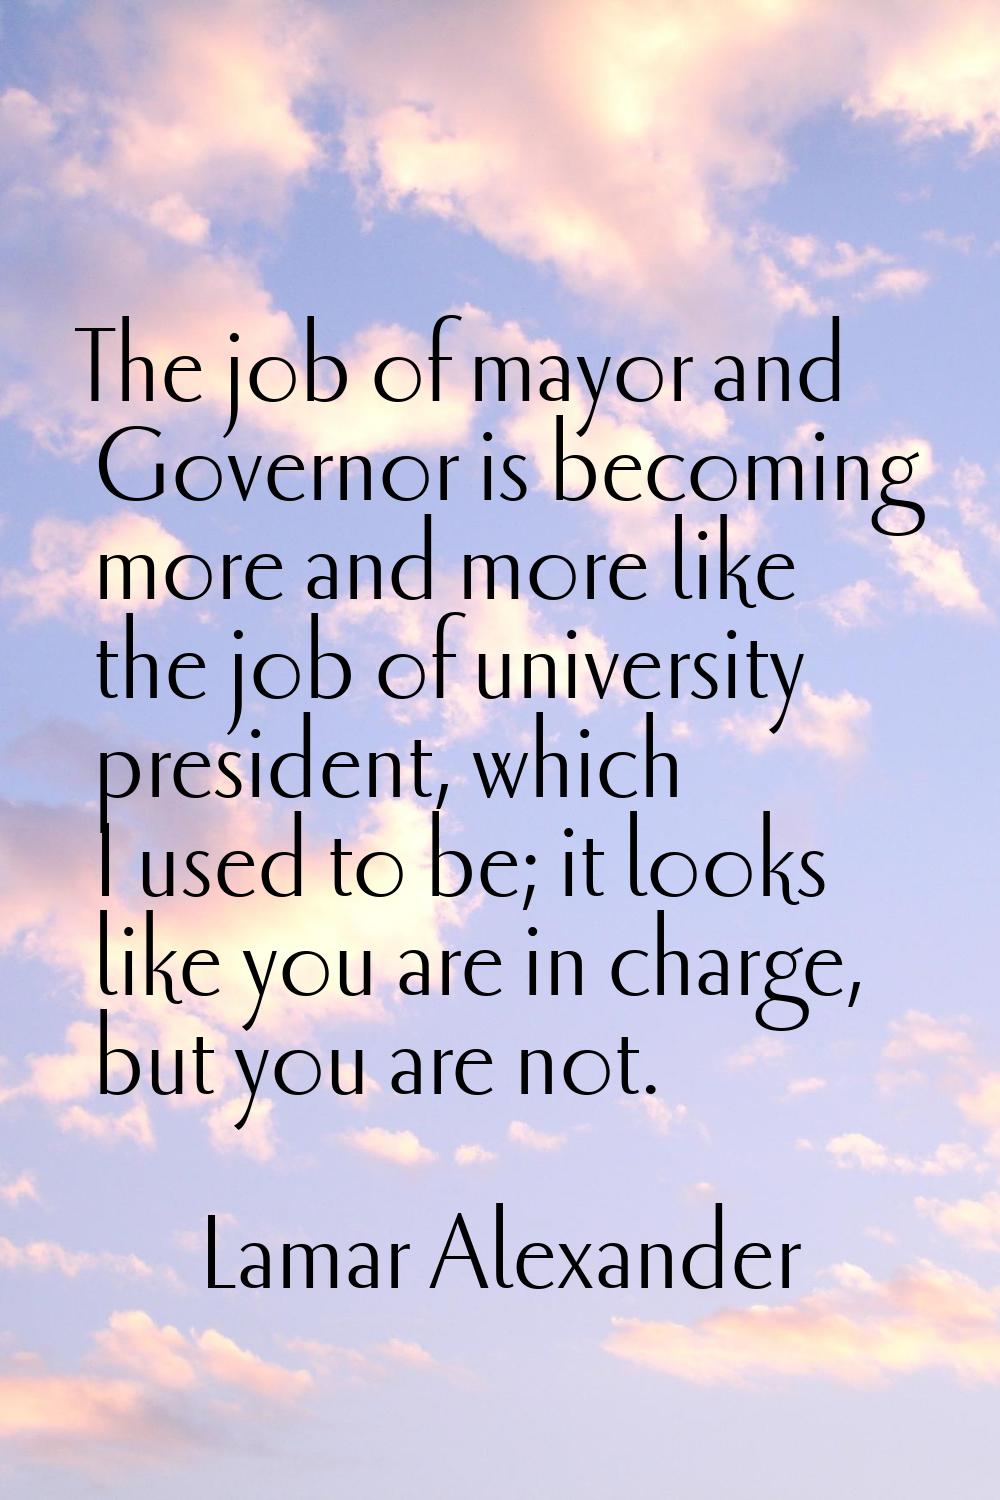 The job of mayor and Governor is becoming more and more like the job of university president, which